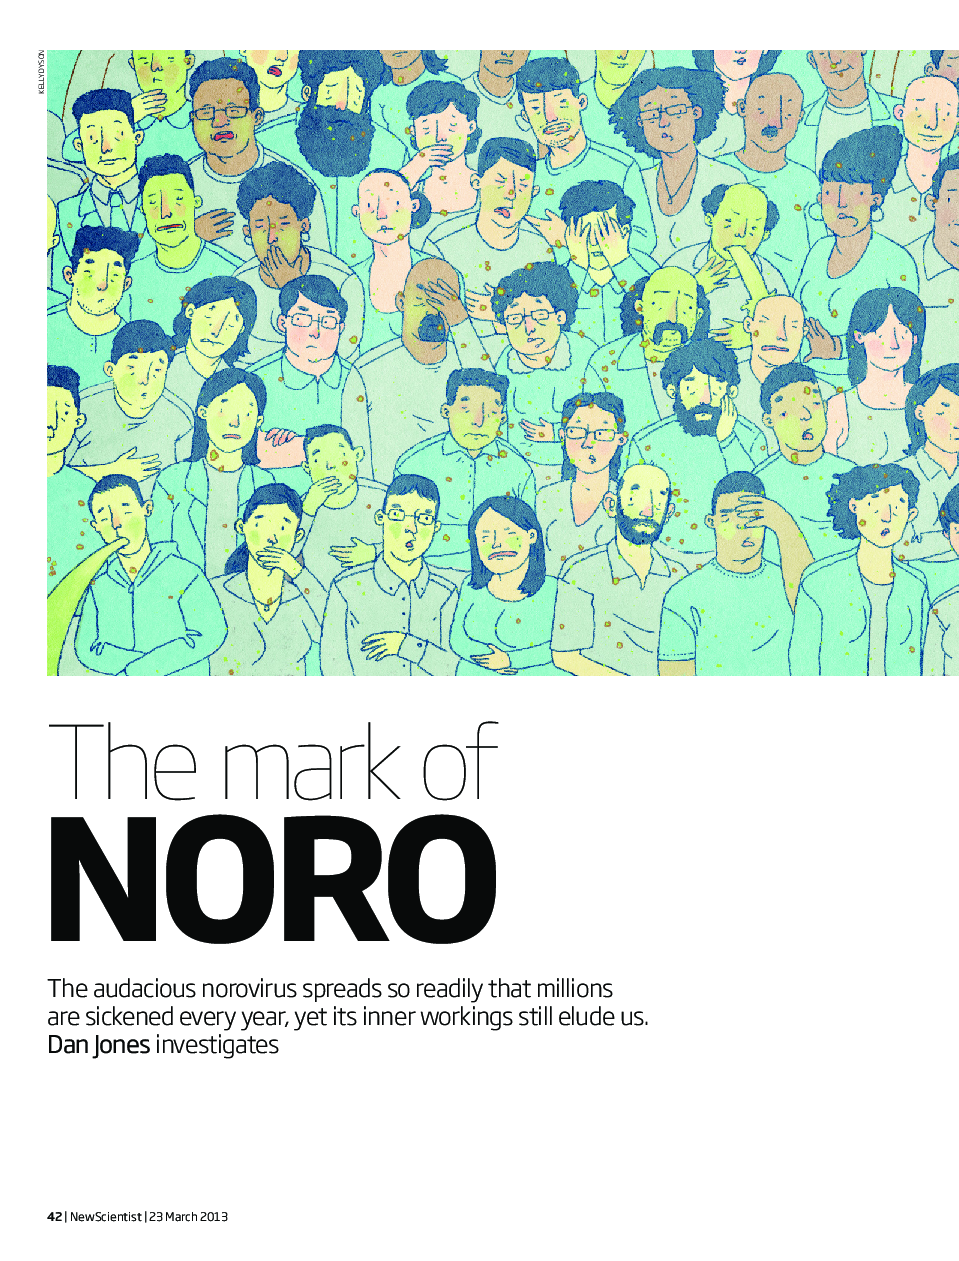 The mark of noro